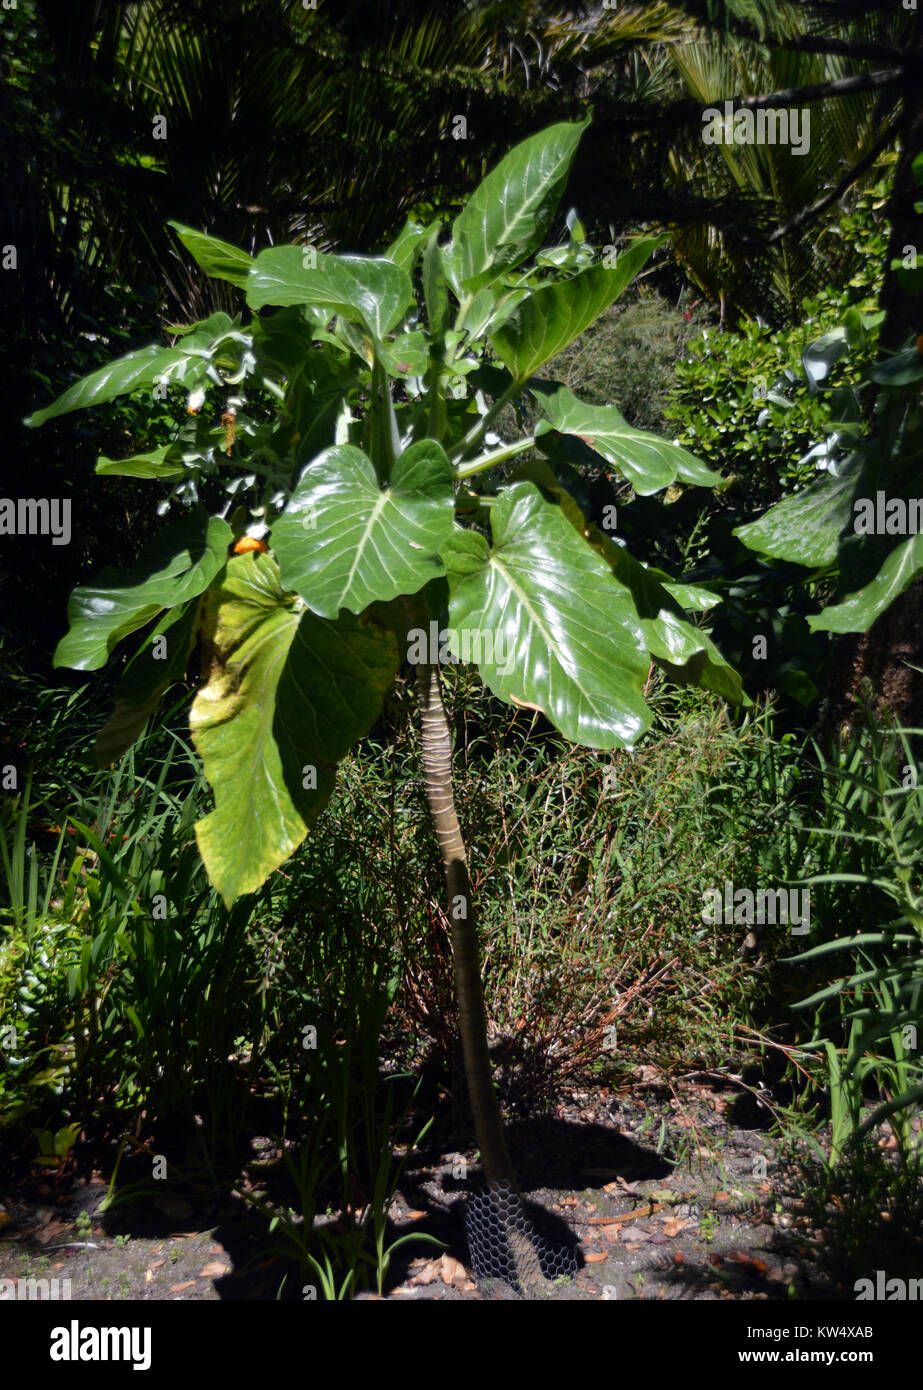 Dendroseris litoralis,(Robinson Crusoe Islands' Cabbage Tree) in Abbey Gardens on the Island of Tresco in the Isles of Scilly, England, Cornwall, UK. Stock Photo